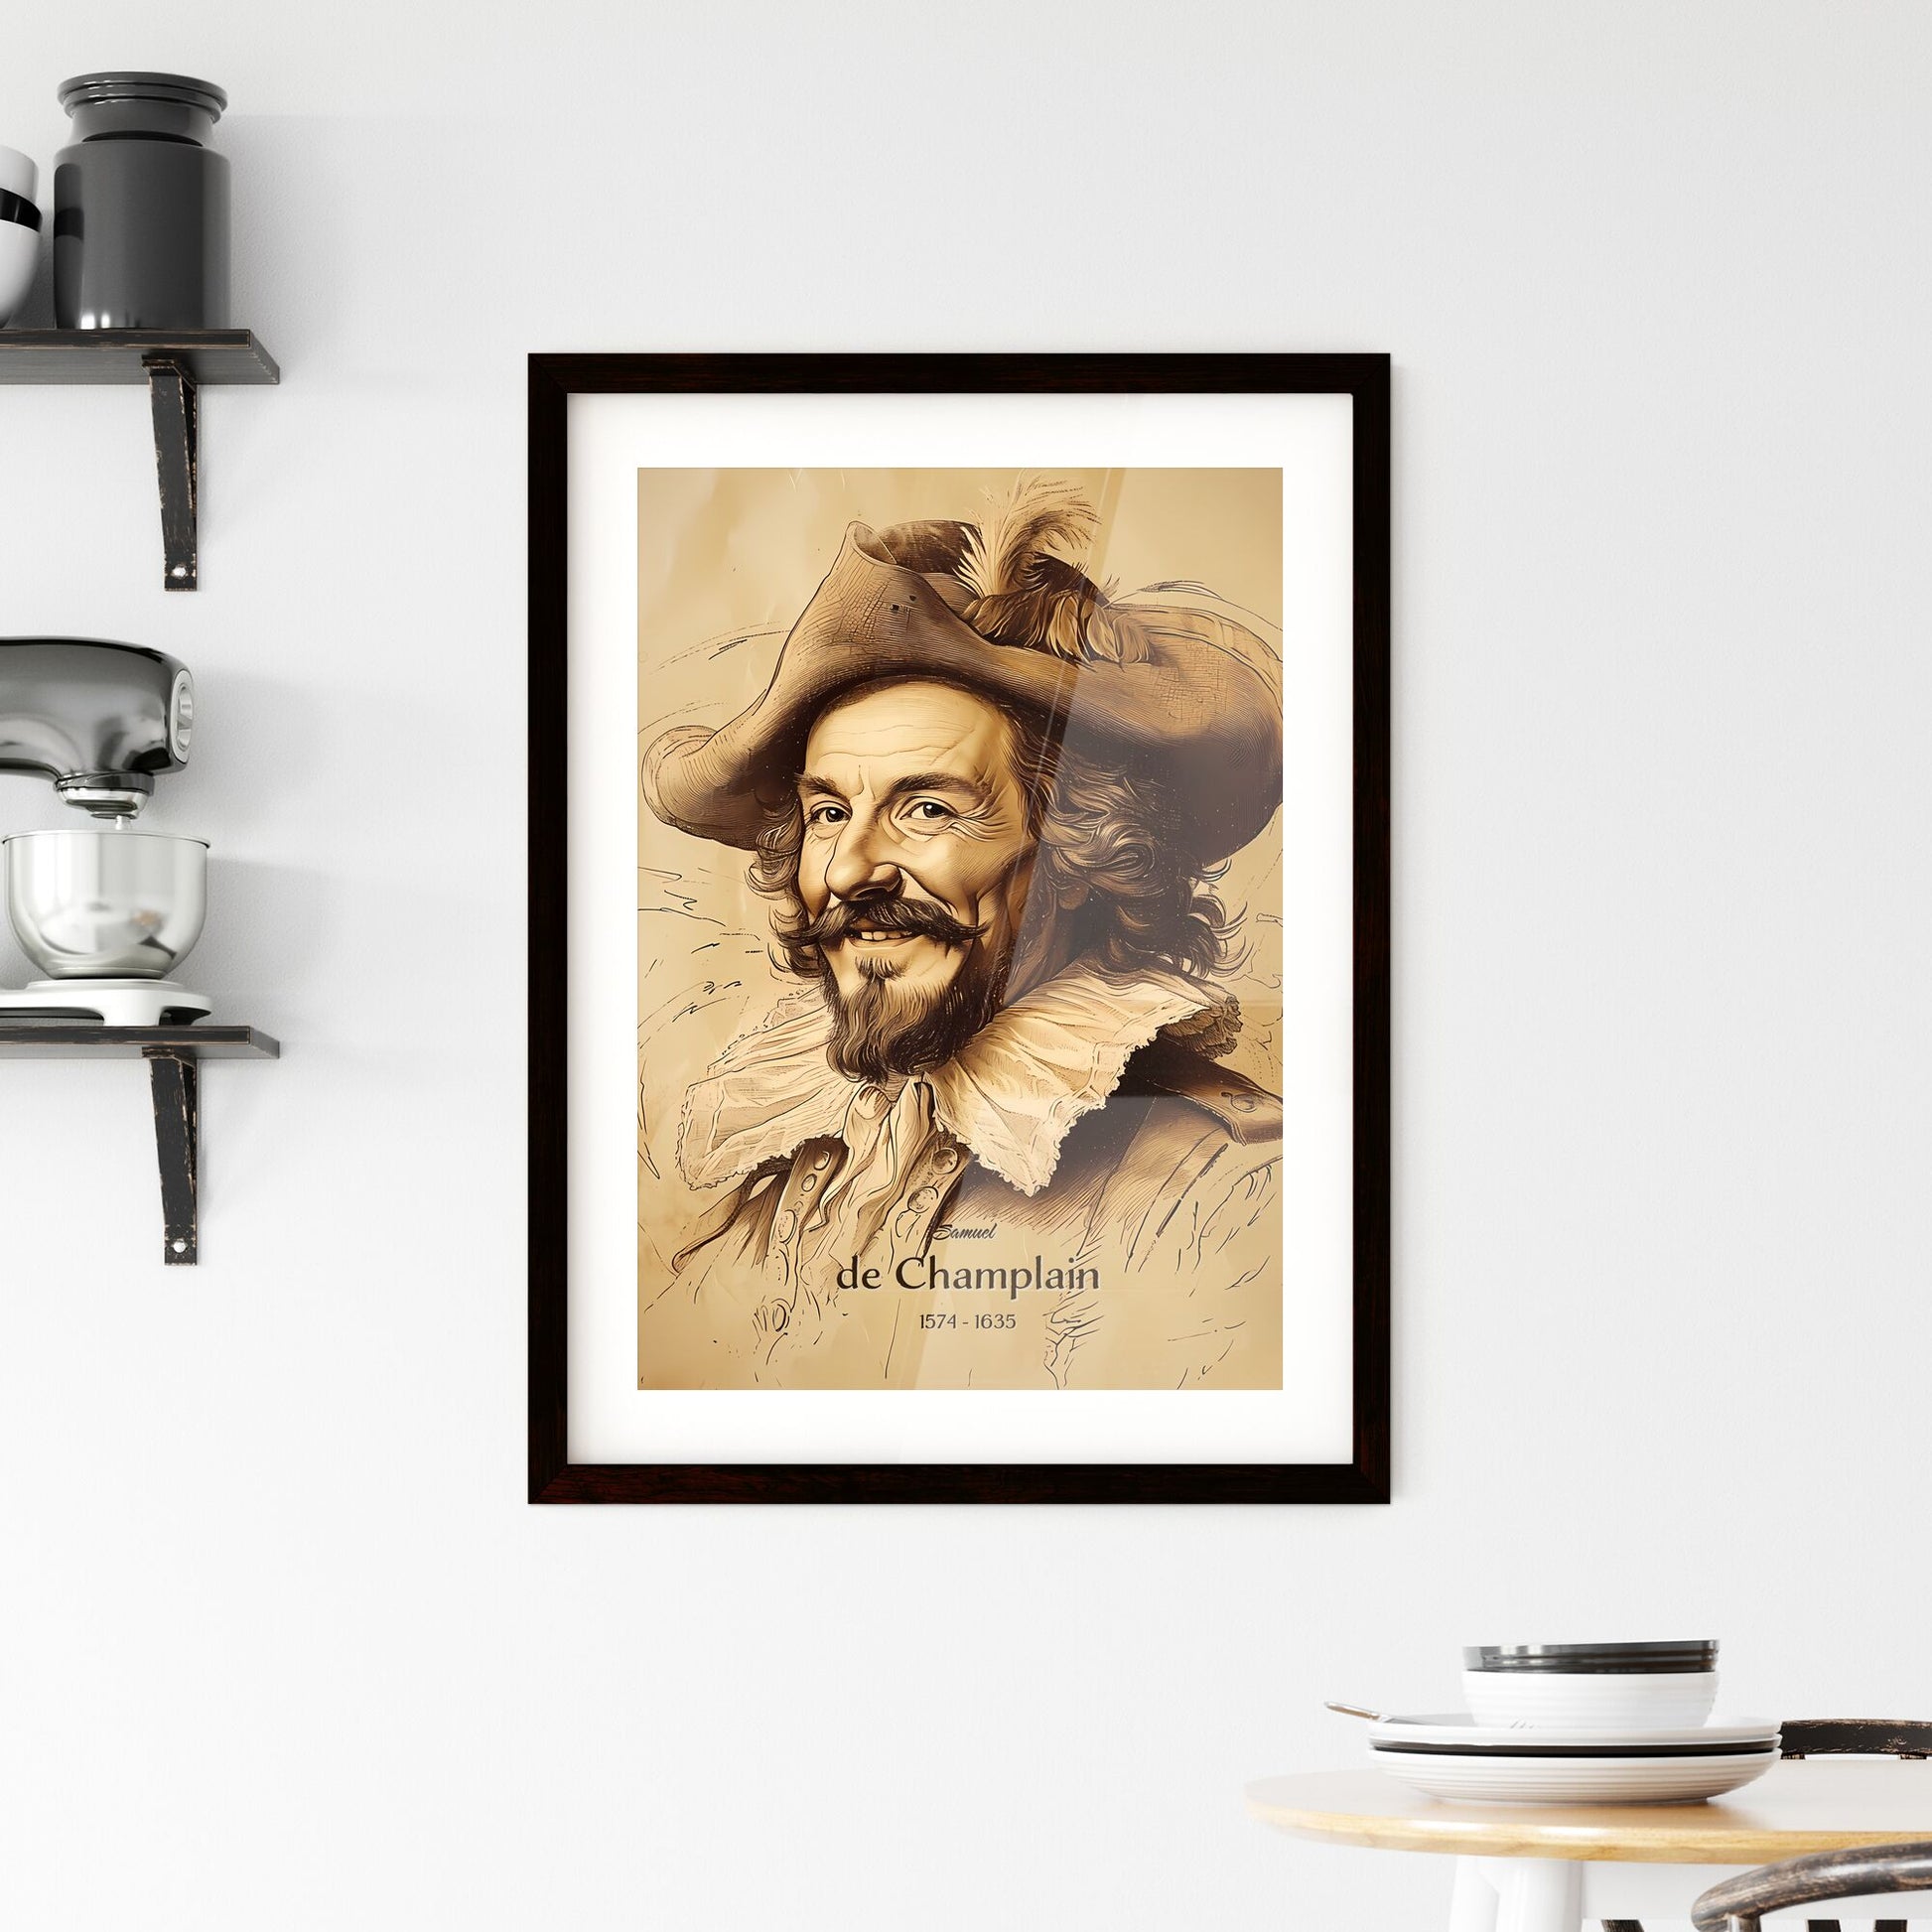 Samuel, de Champlain, 1574 - 1635, A Poster of a drawing of a man in a hat Default Title